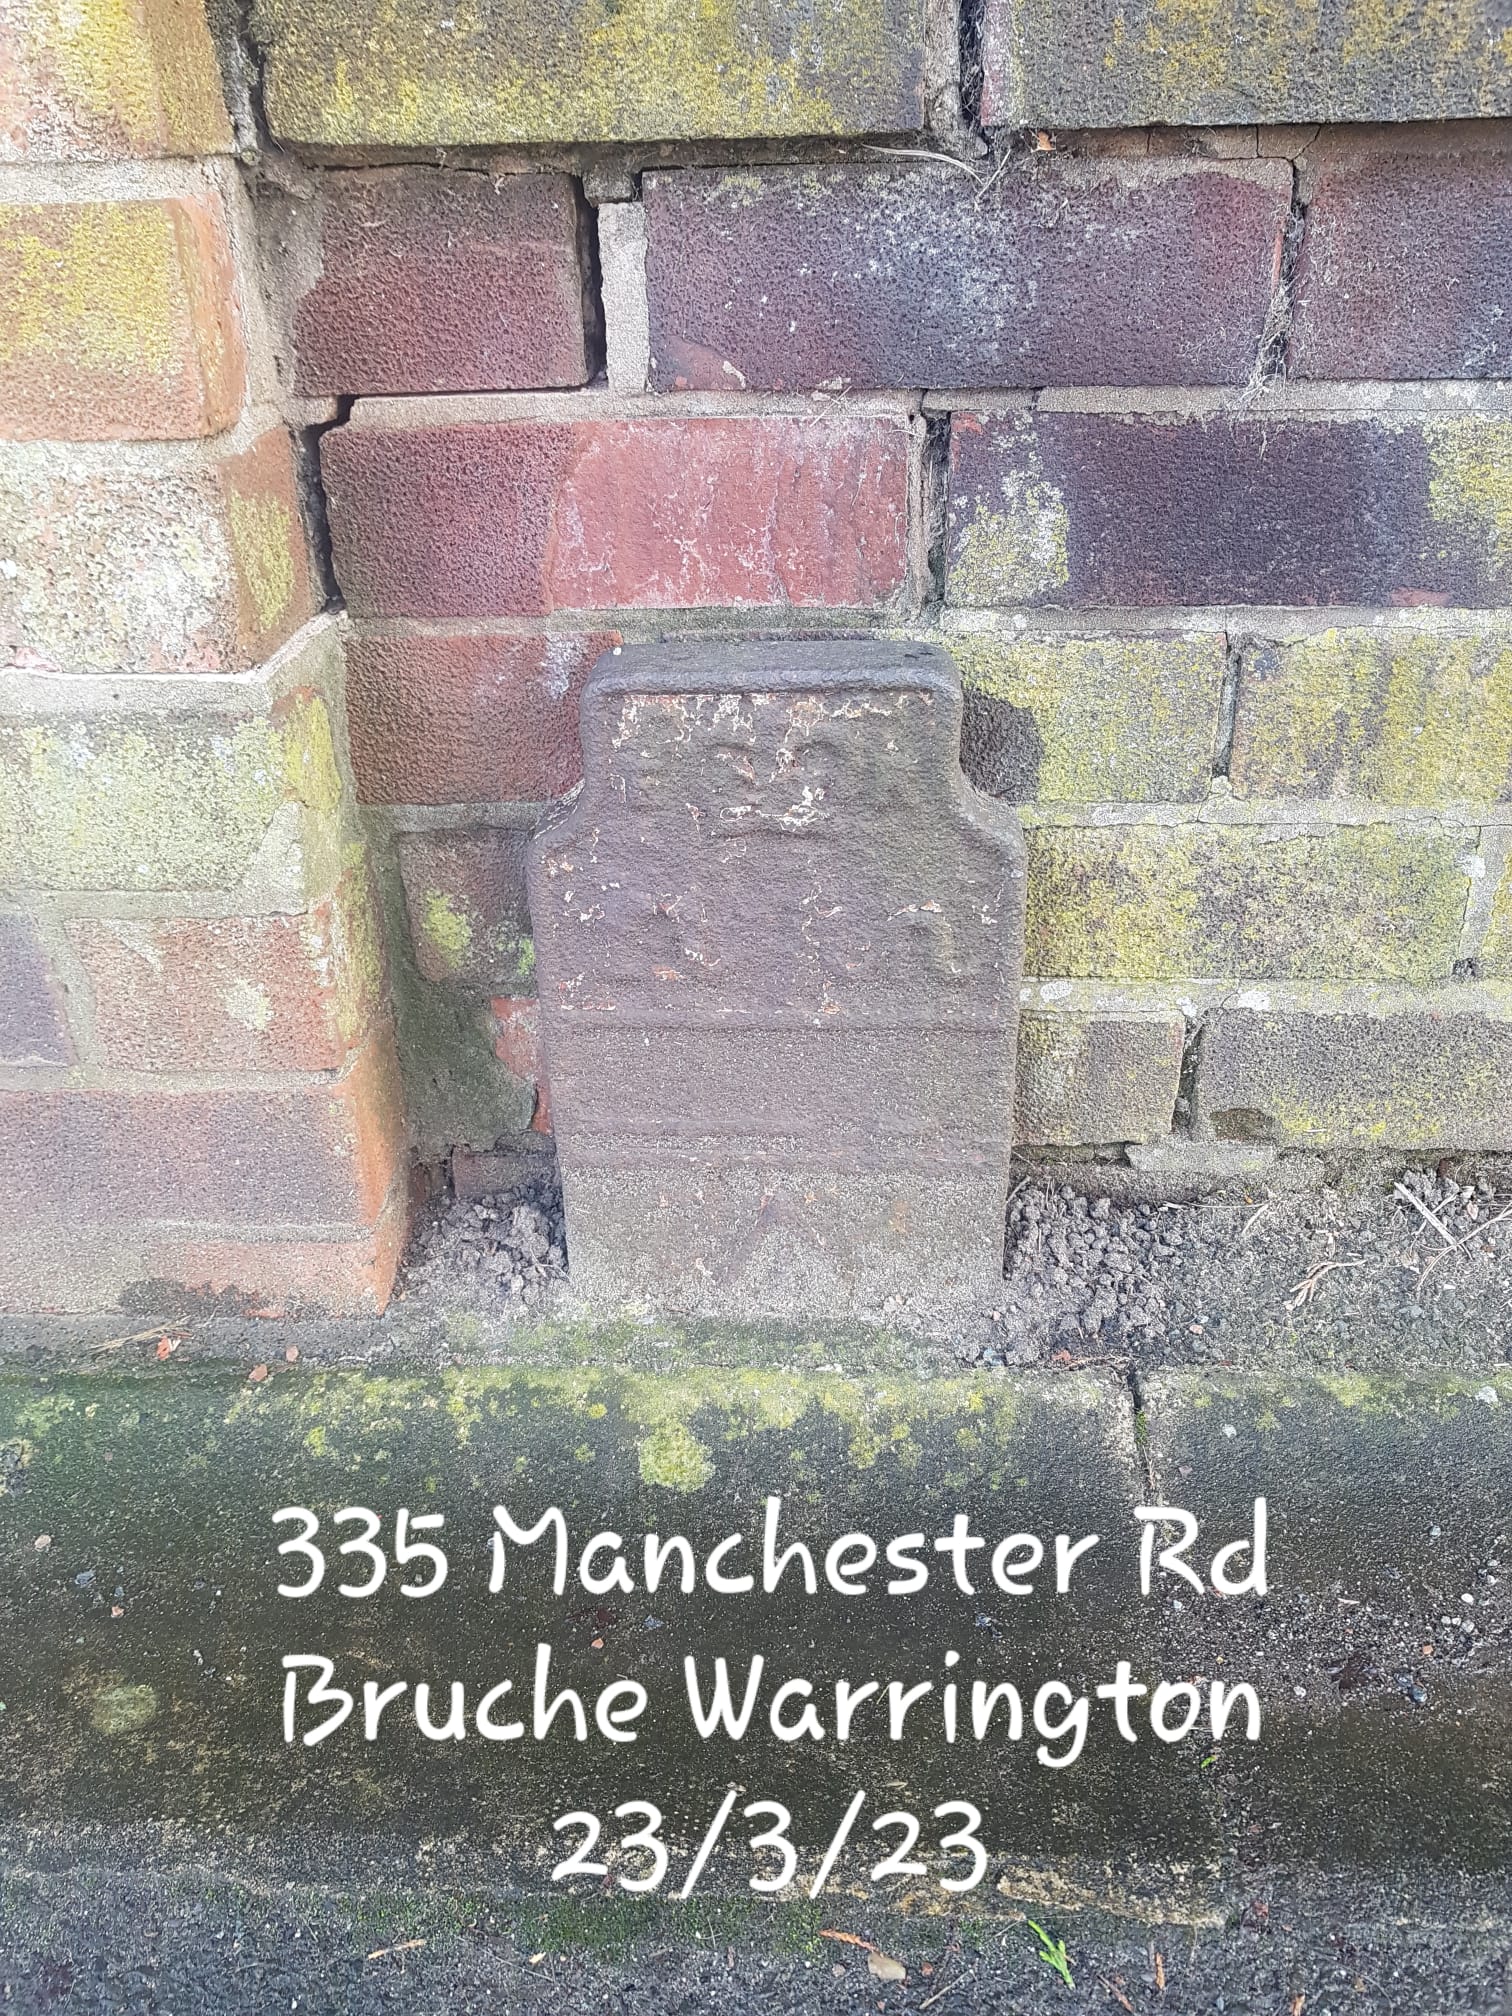 Telegraph cable marker post at 335 Manchester Road, Bruche, Warrington by Jan Gibbons 